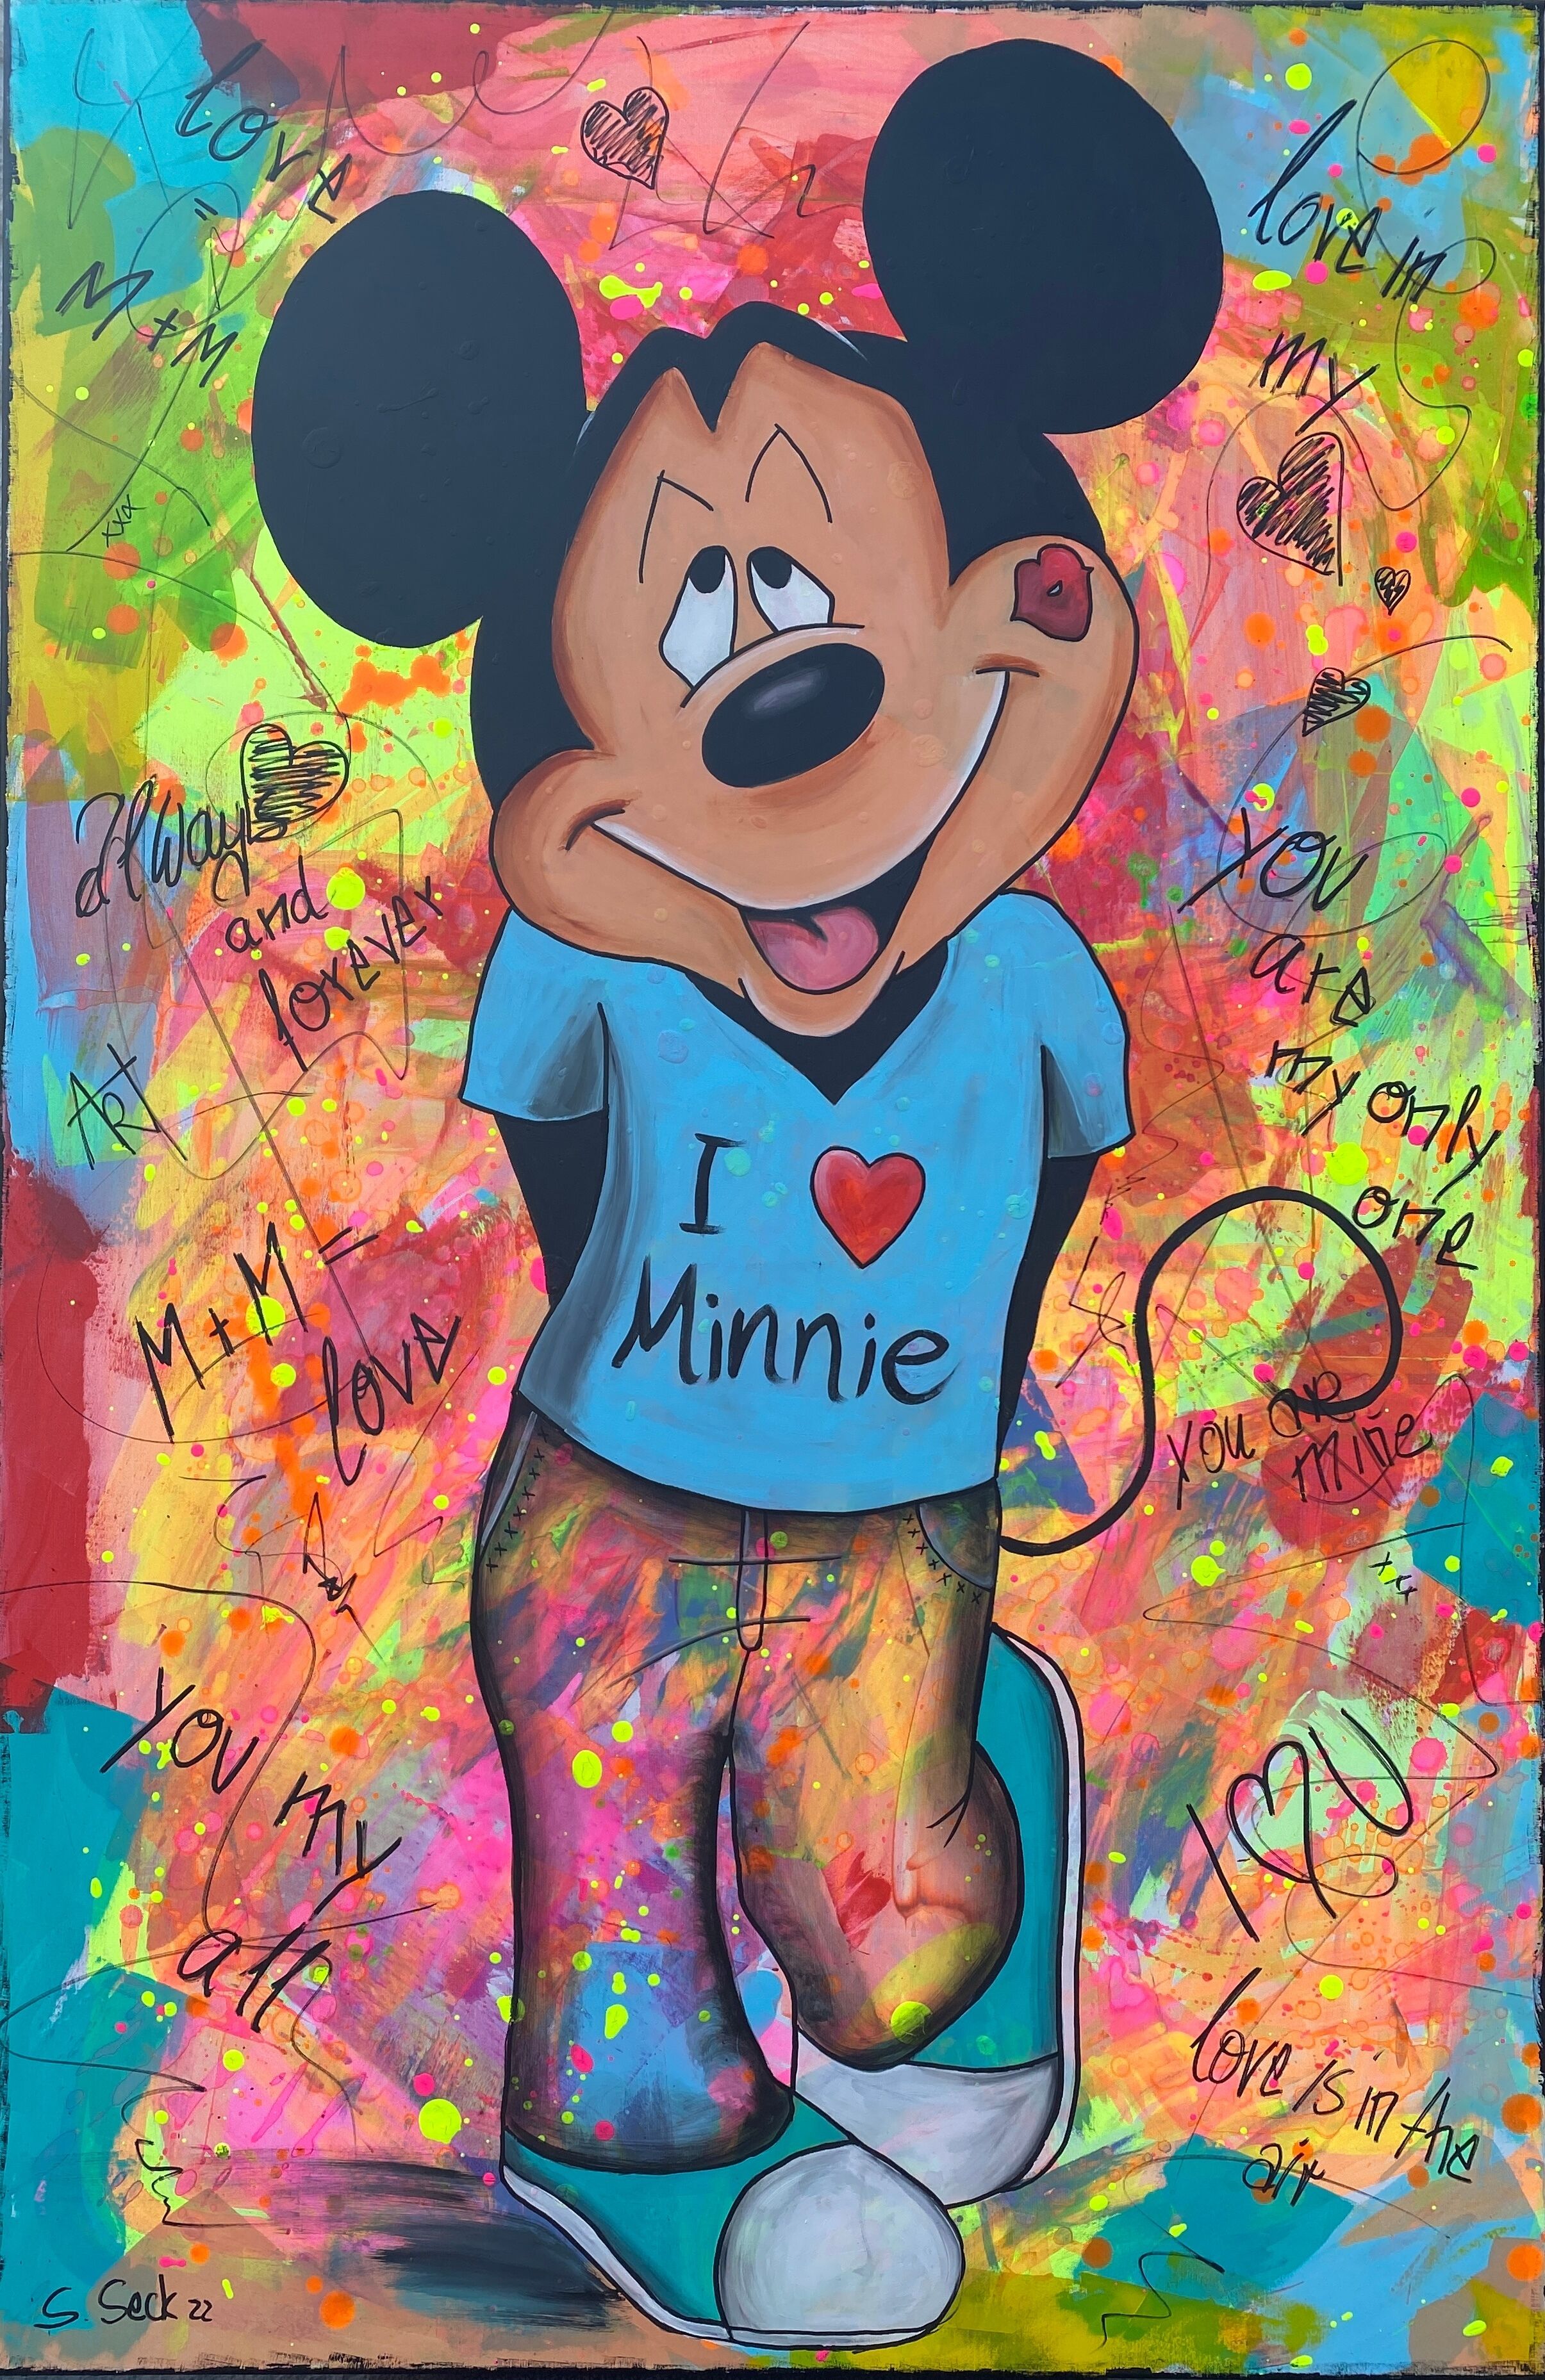 Picture "Mickey loves Minni" (2022)